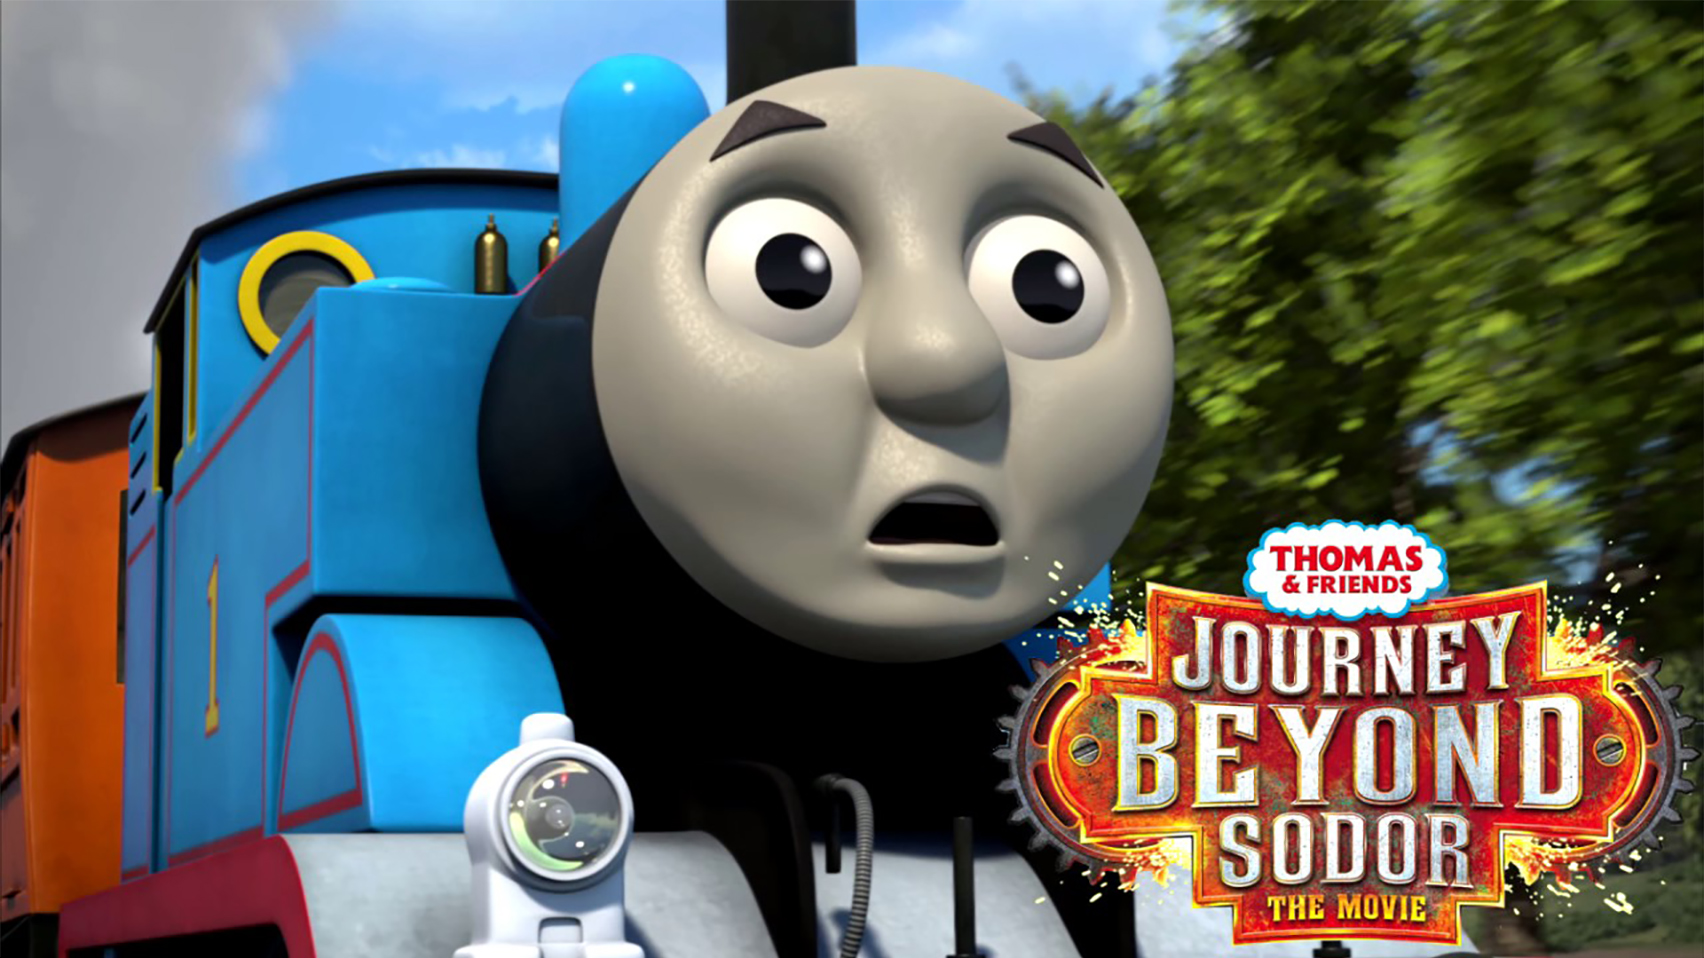 Journey to a friend. Thomas and friends Journey Beyond Sodor. Thomas and friends Journey Beyond Sodor 2017.